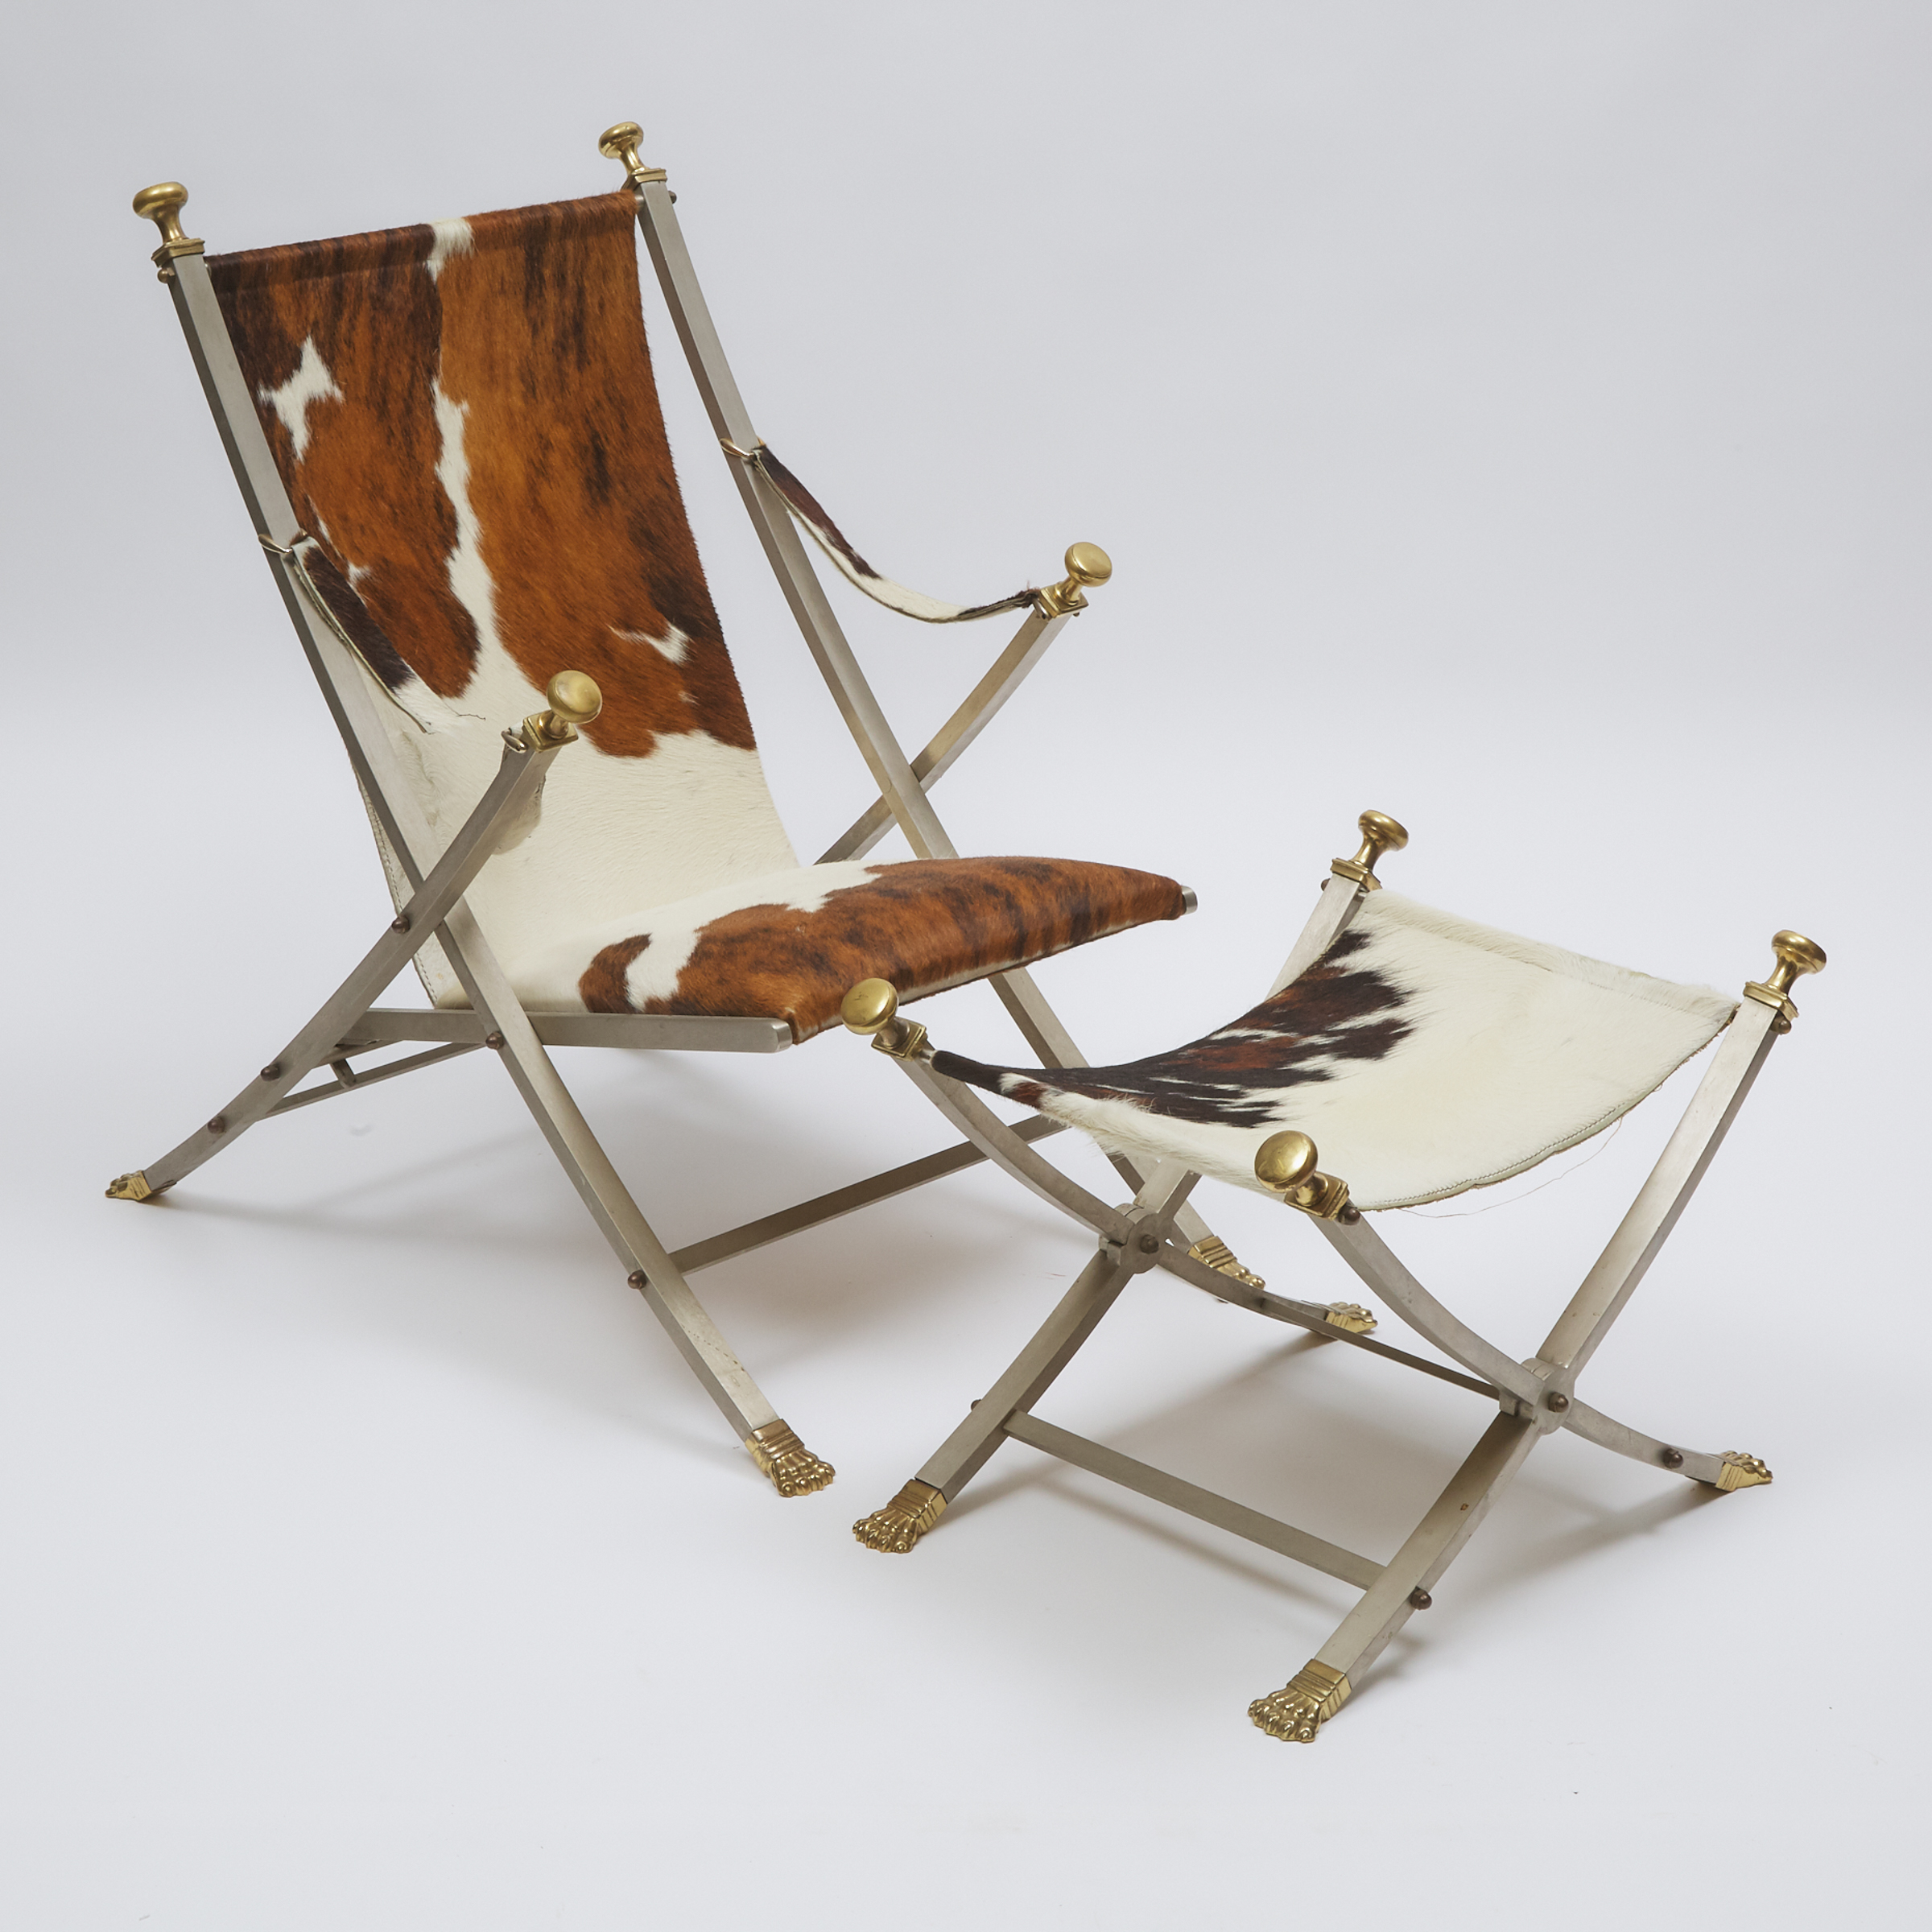 Neoclassical Bronze Mounted Brushed Steel Campaign Chair and Ottoman by Otto Parzinger for Maison Jansen, Paris, c.1970